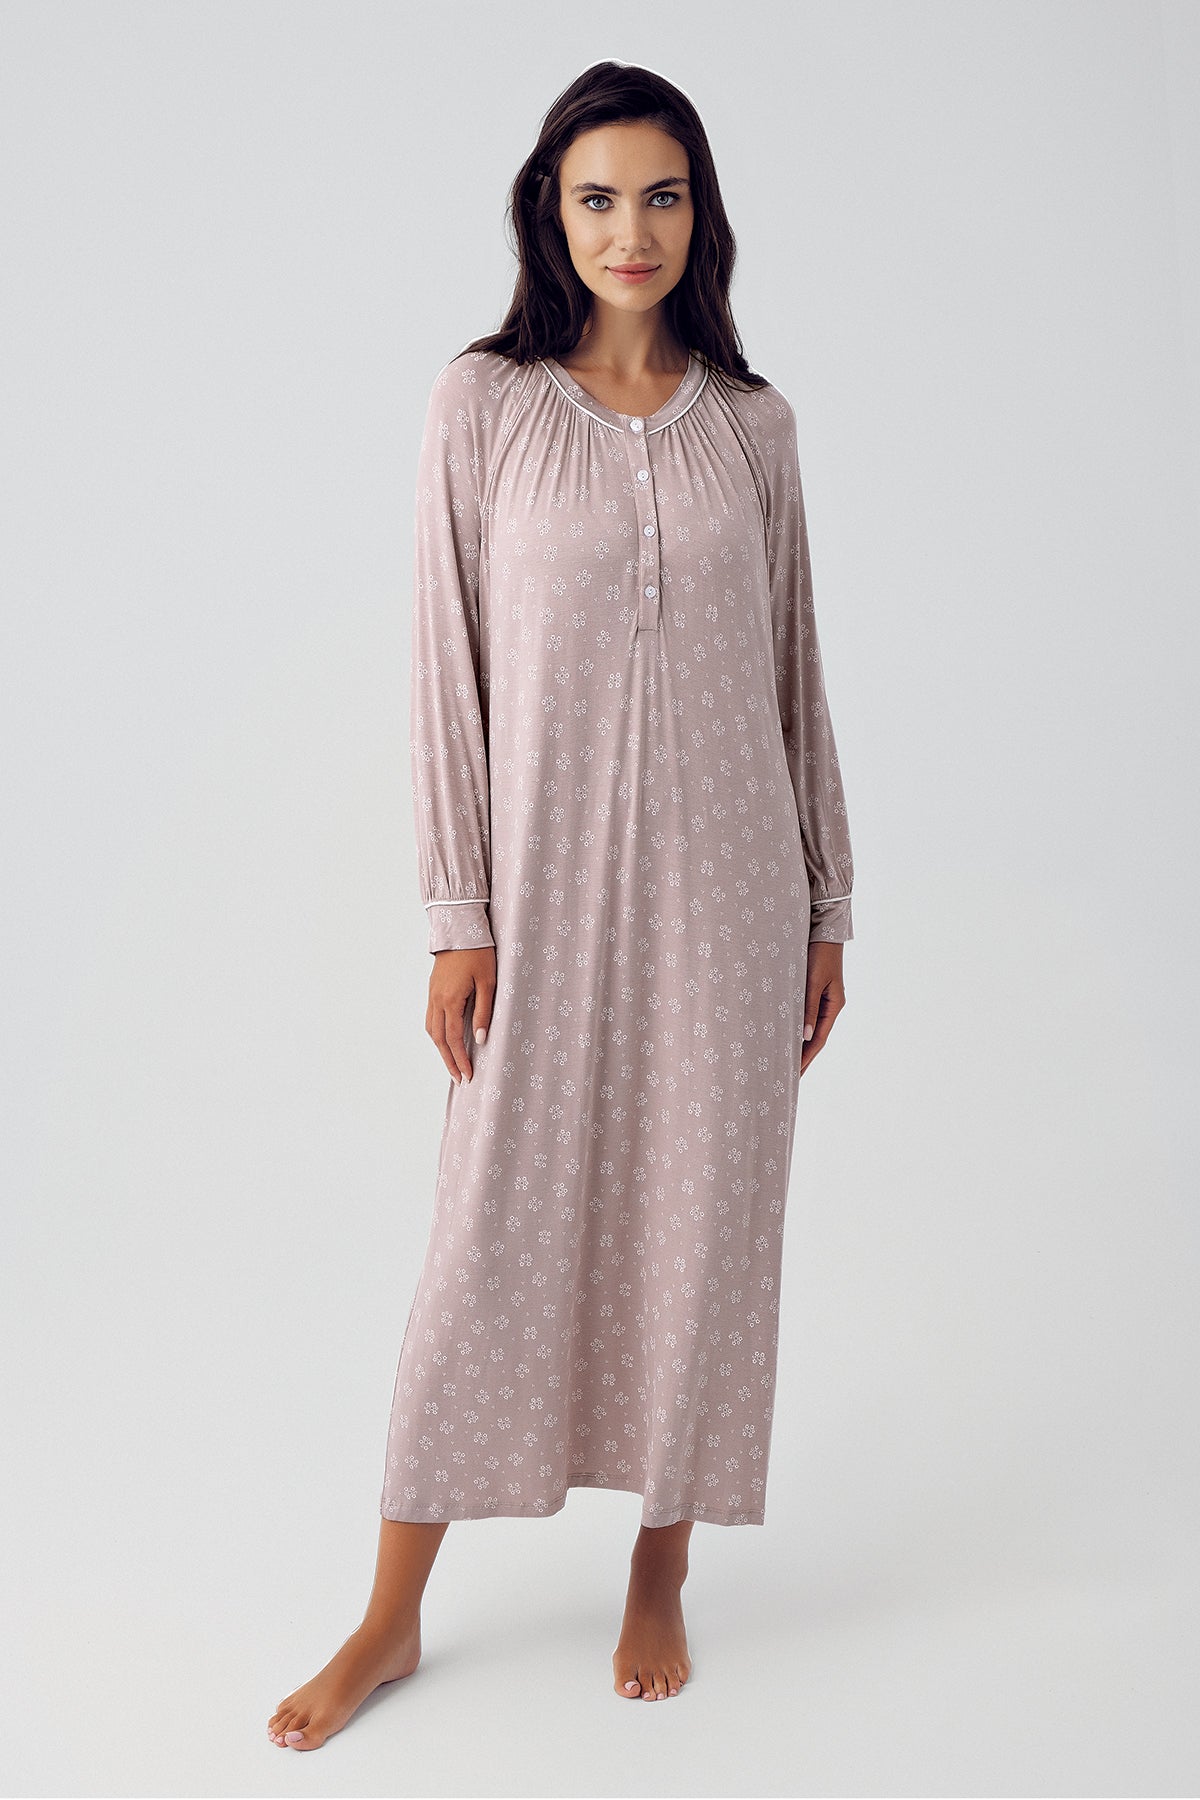 Shopymommy 15118 Patterned Plus Size Maternity & Nursing Nightgown Coffee